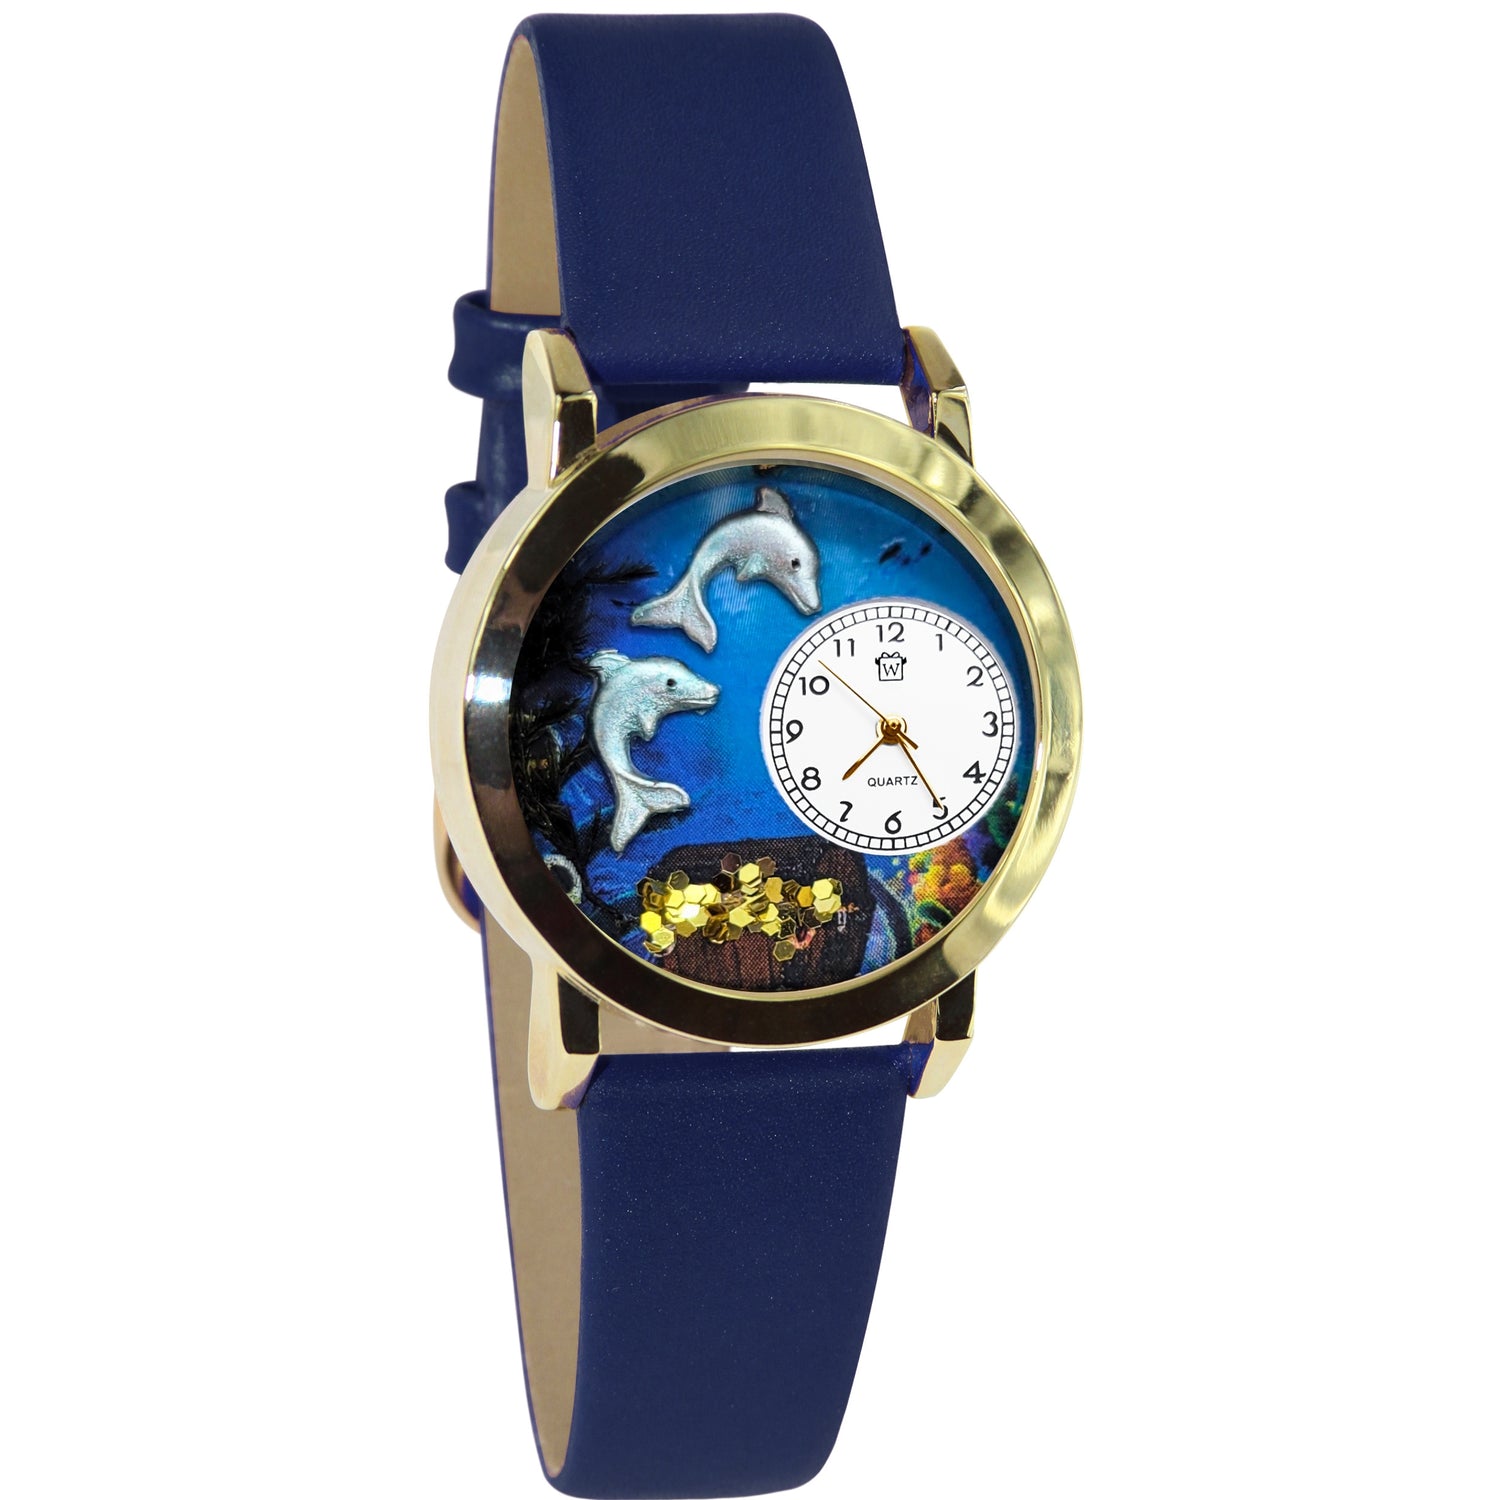 Whimsical Gifts | Dolphin 3D Watch Small Style | Handmade in USA | Animal Lover | Zoo & Sealife | Novelty Unique Fun Miniatures Gift | Gold Finish Light Blue Leather Watch Band